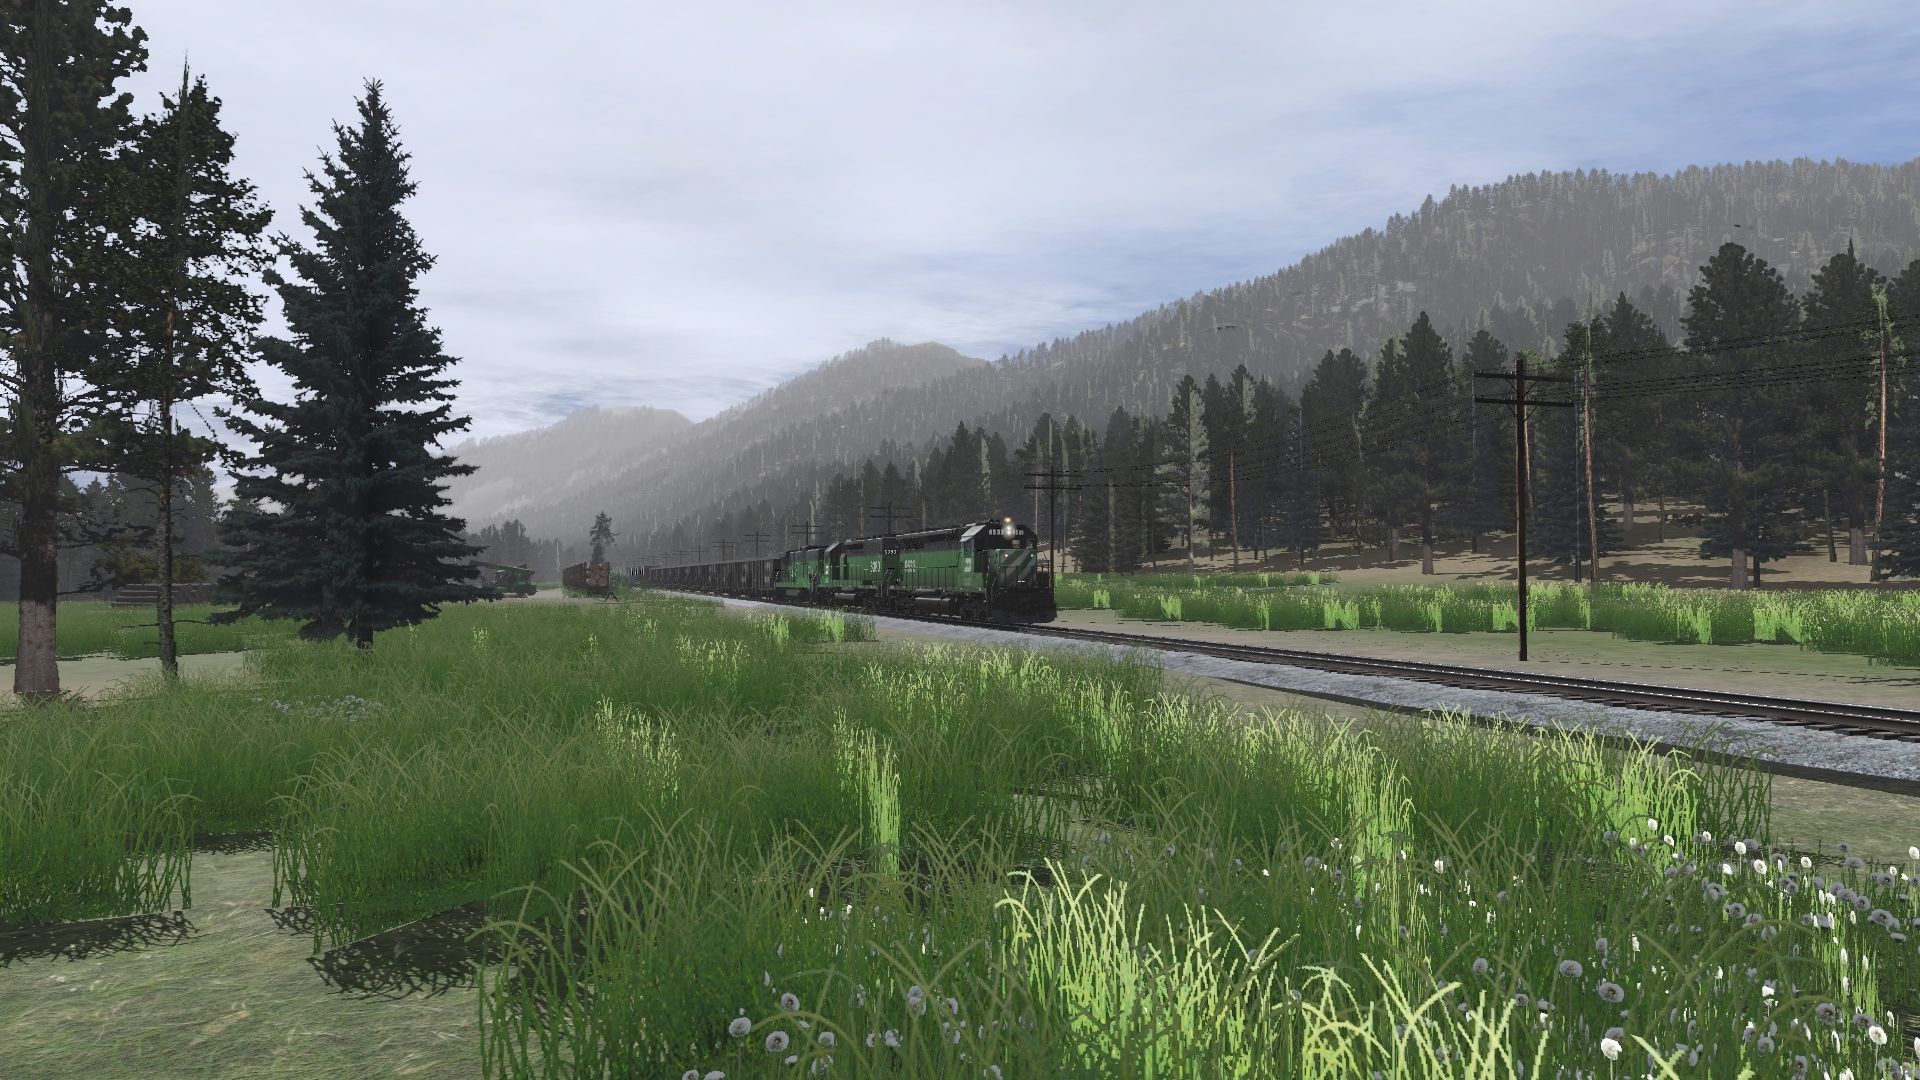 Extra-6533-West-rolls-past-the-still-active-log-loadout-at-Pine.jpg